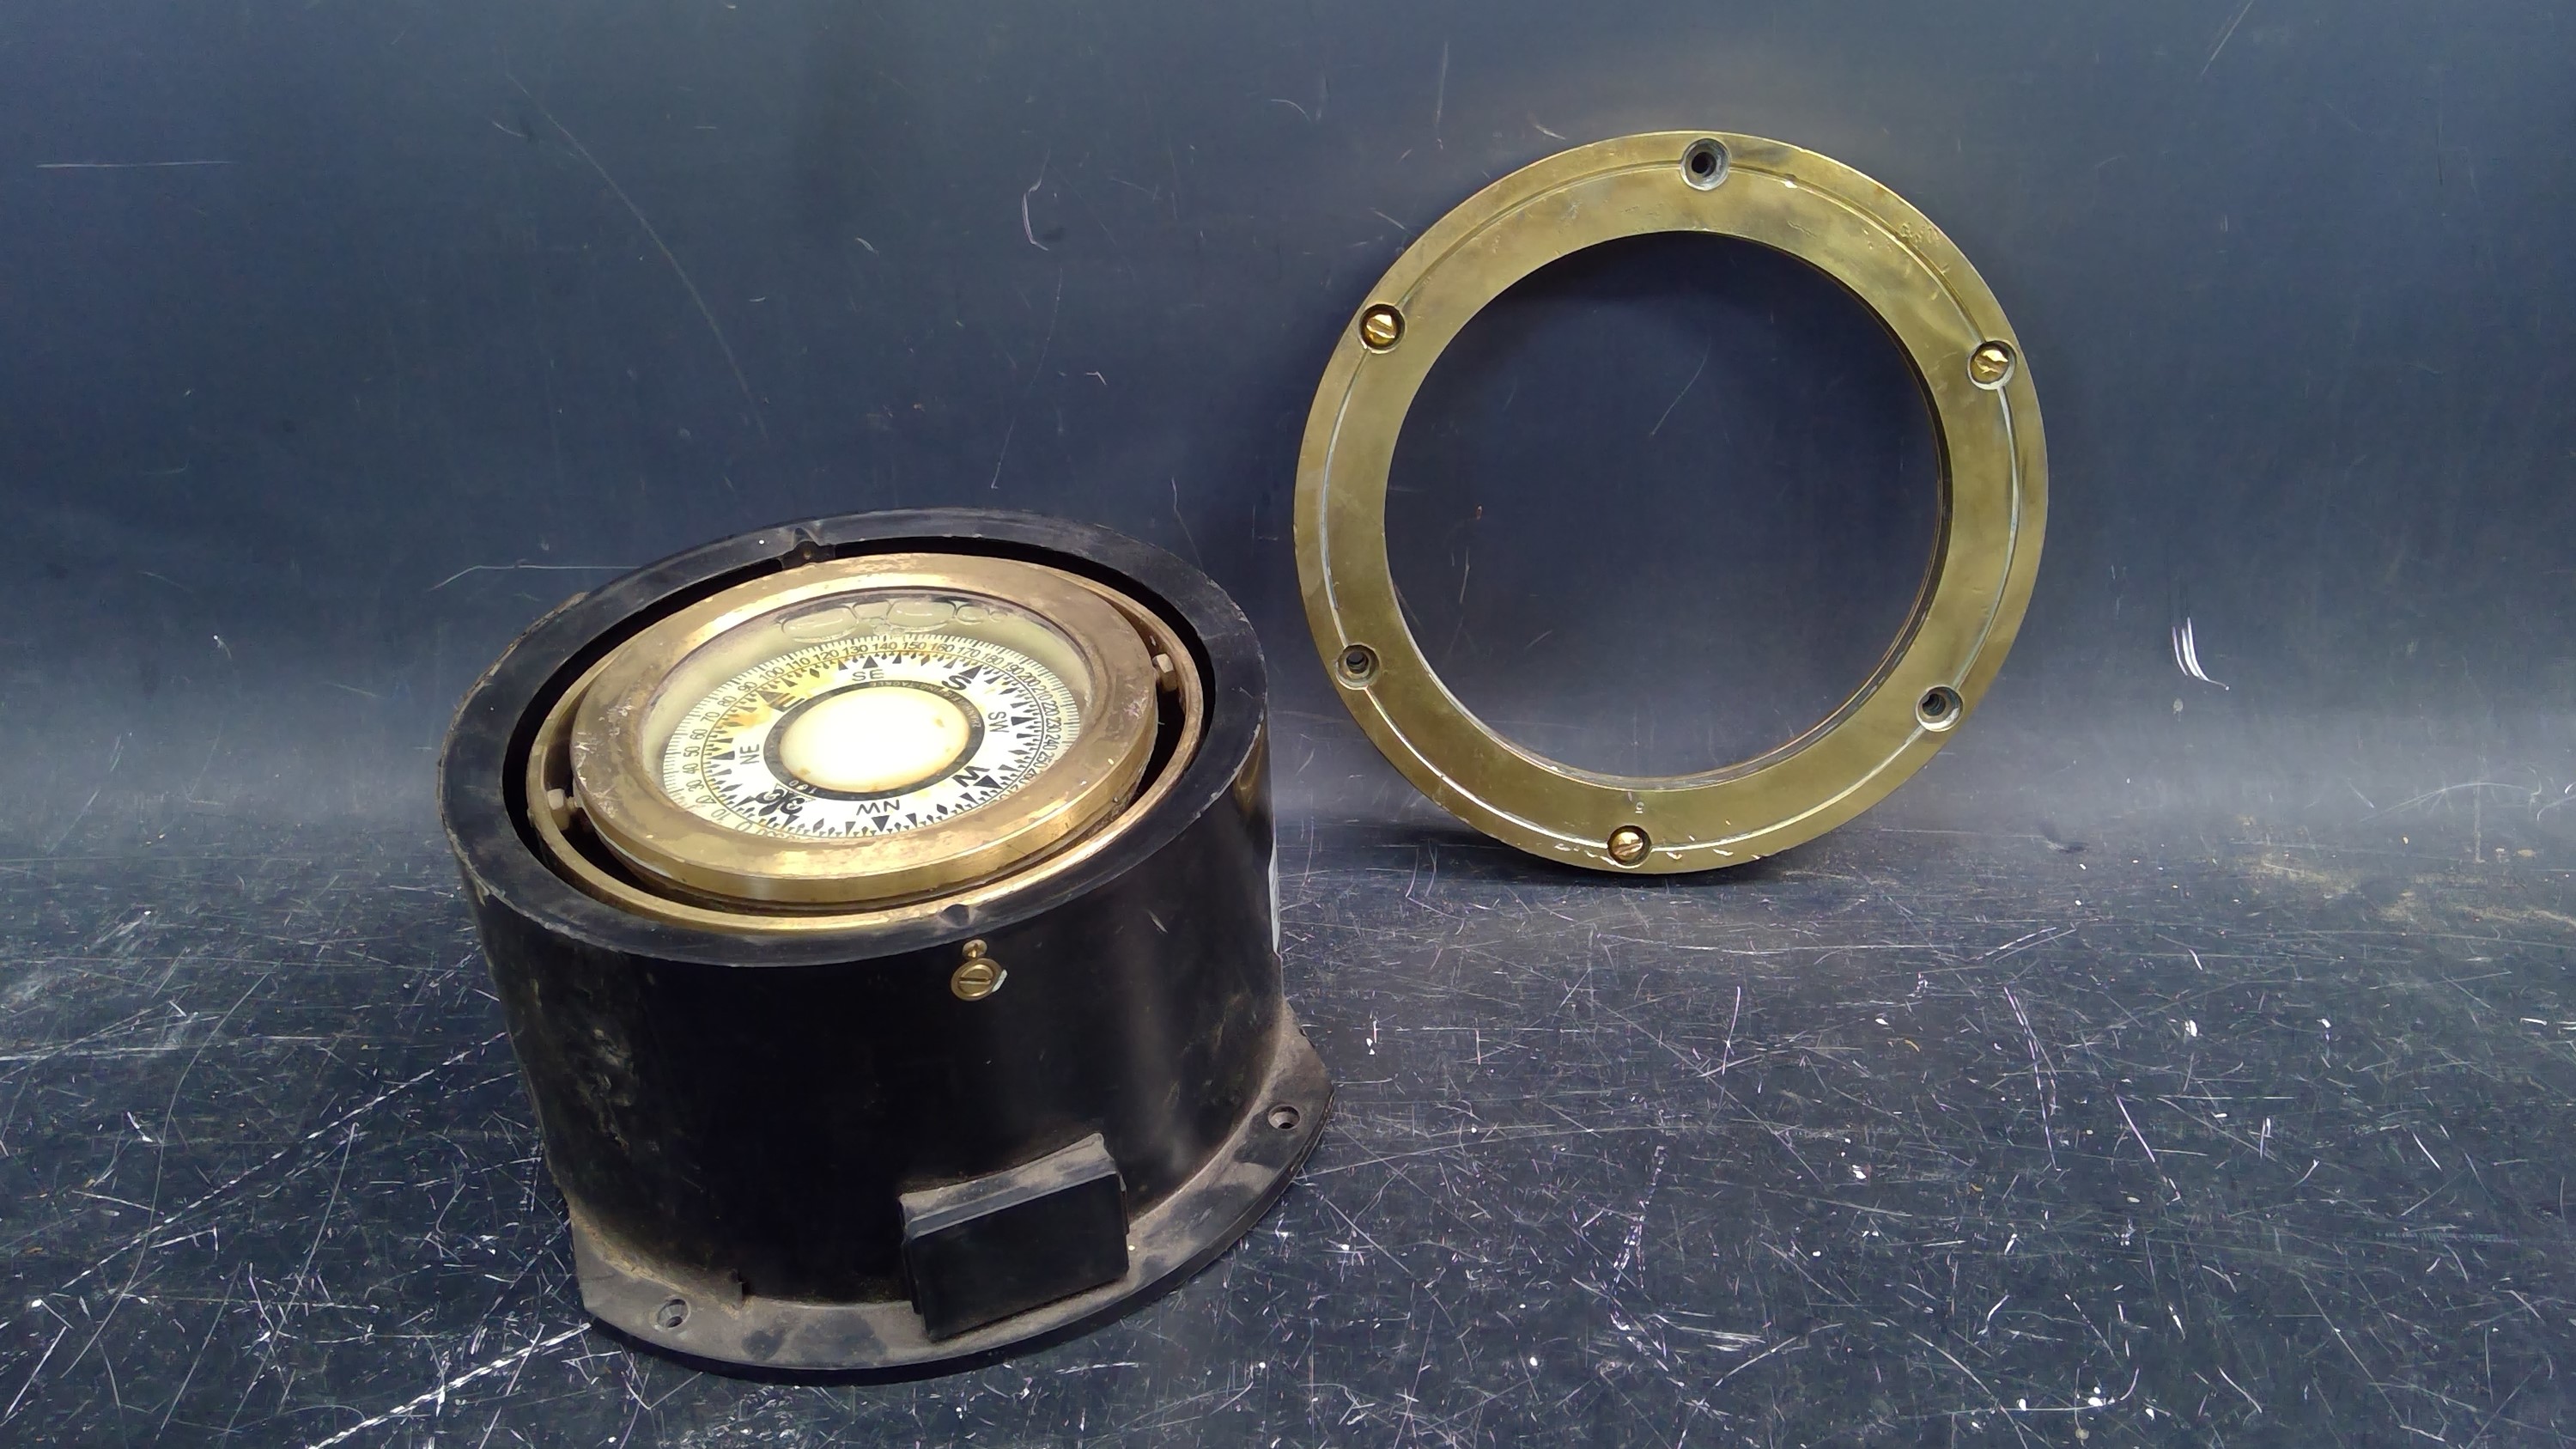 Lot 260 A 196070s Ships Compass In A Plastic